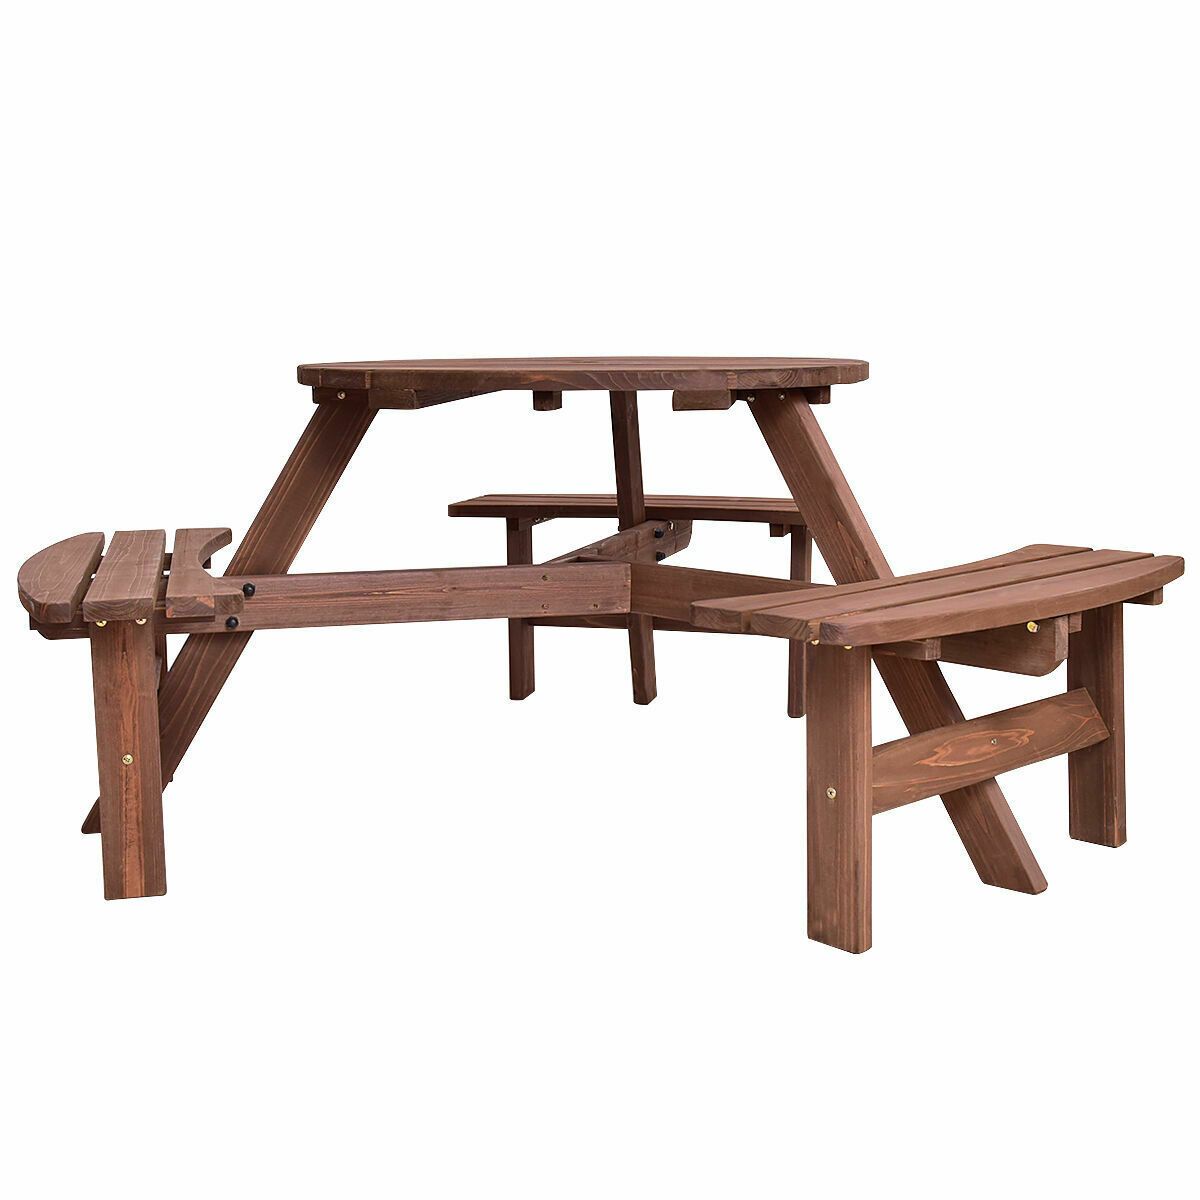 Premium Large Wooden Round Outdoor Patio Picnic Table - Westfield Retailers